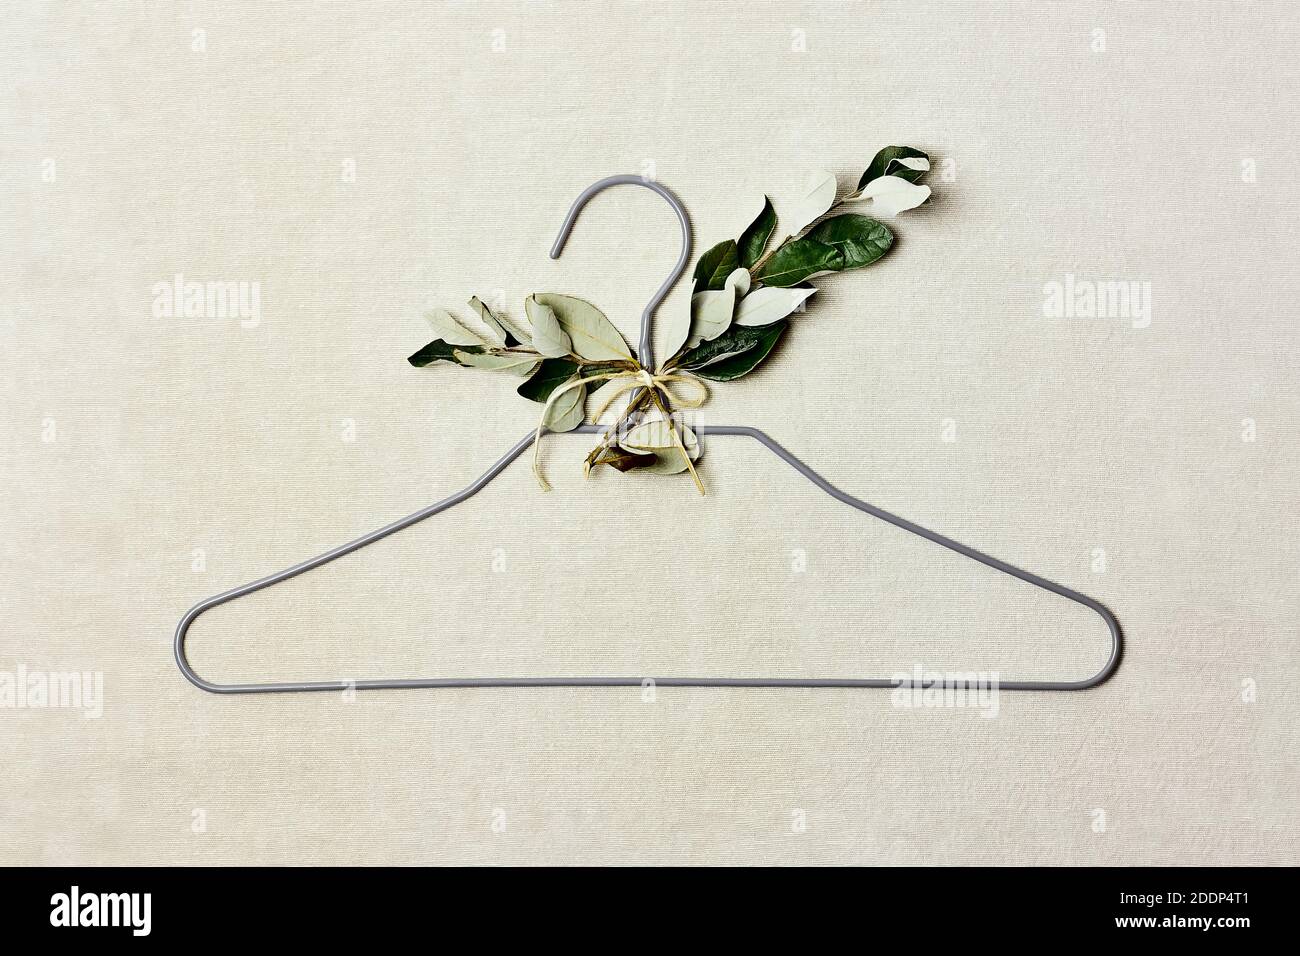 Iron hanger with sprig of the tree with leaves on linen background. Natural aestetic, Eco-friendly, Chic, Cozy, Sustainable Sale concept. Zero waste Stock Photo